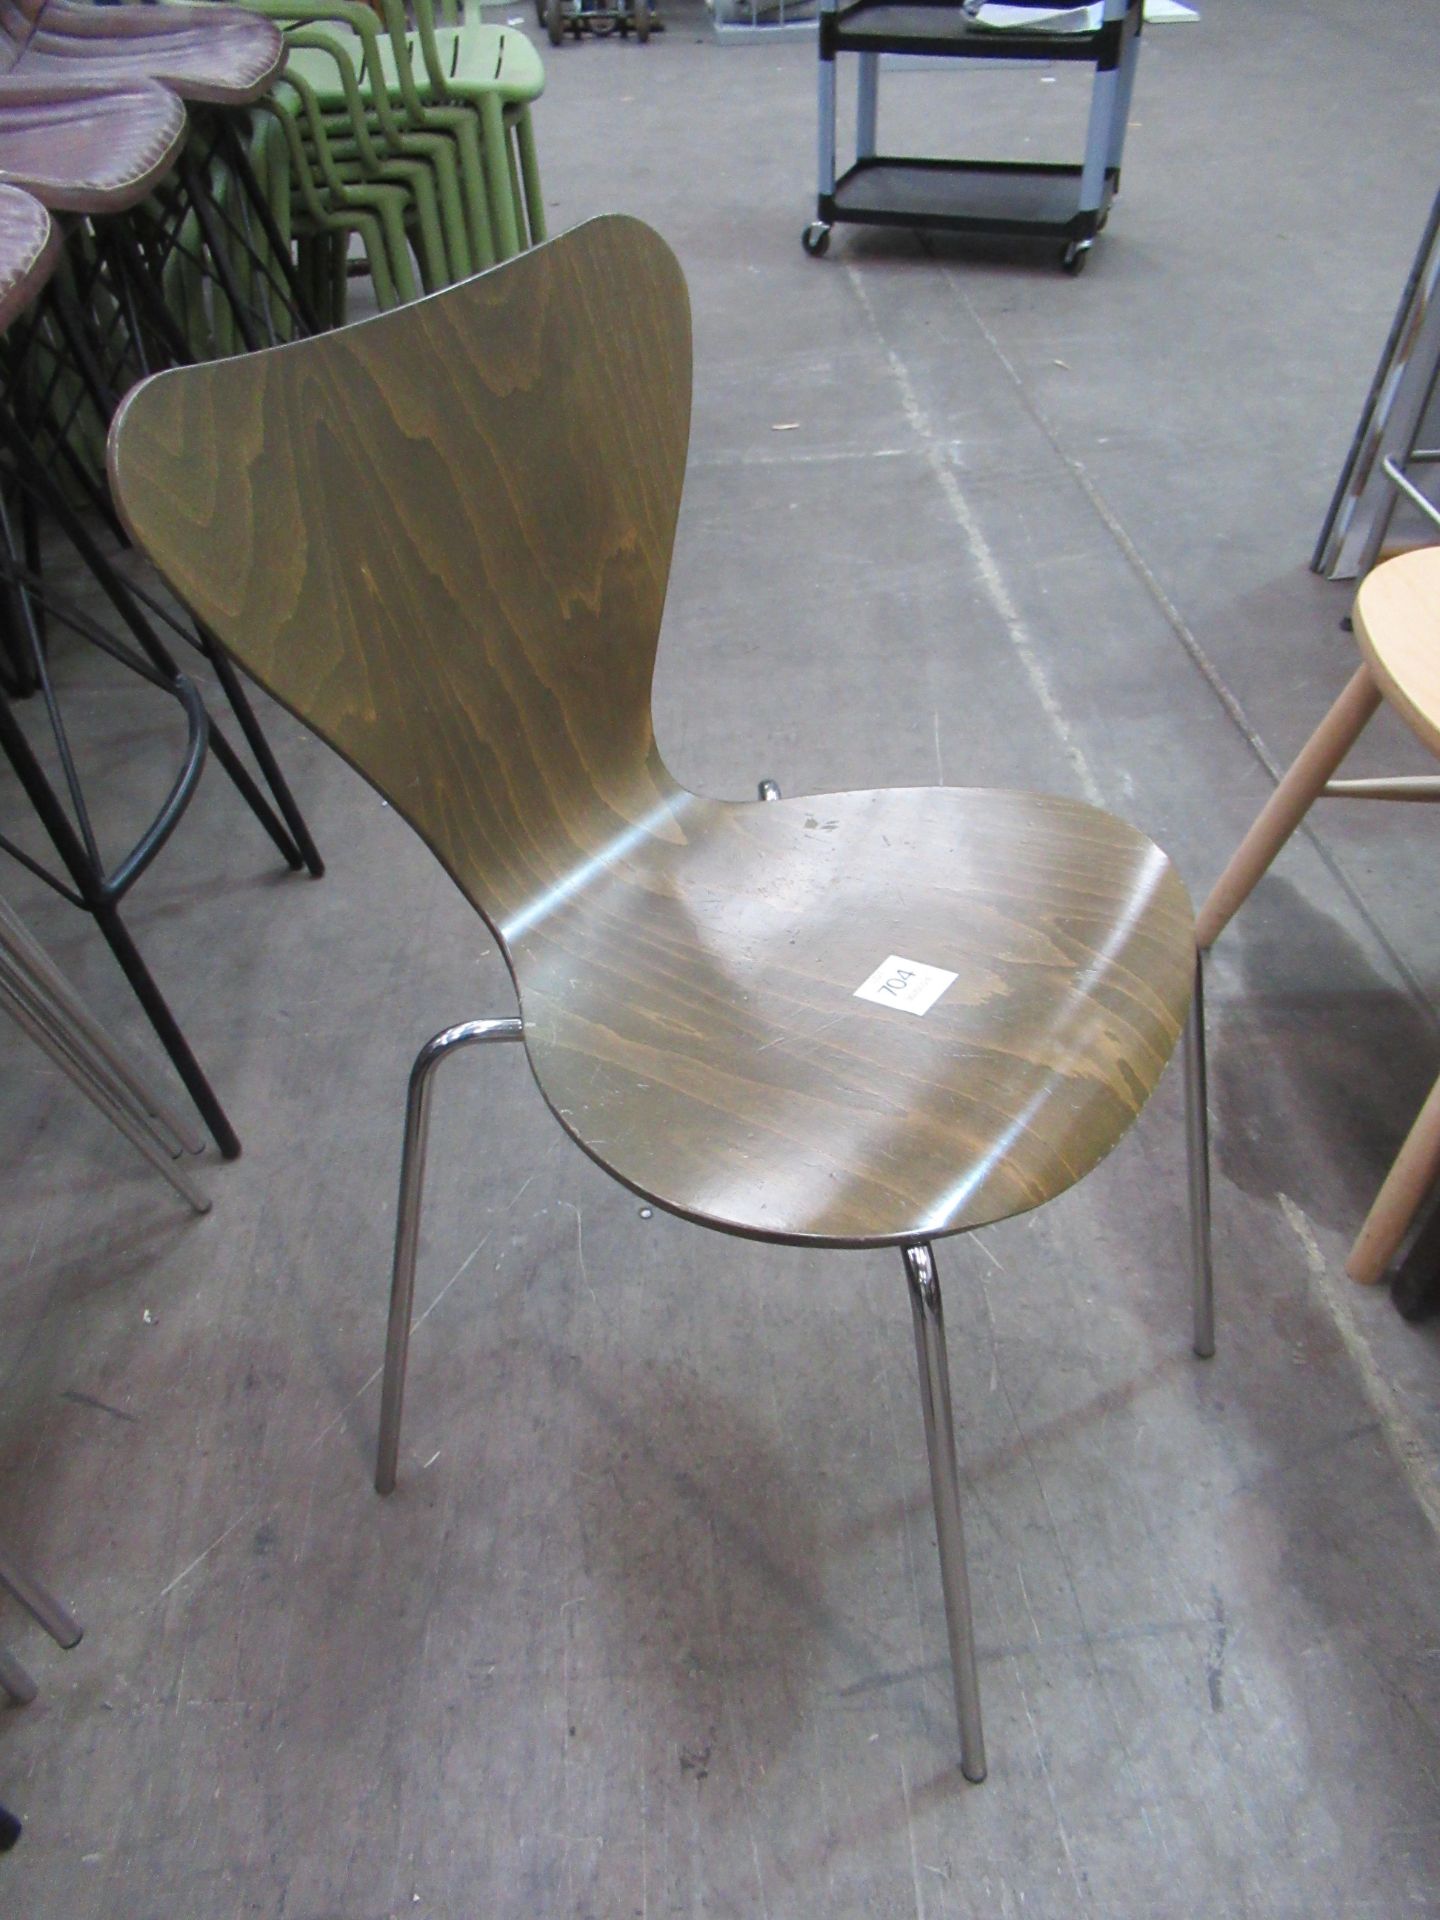 10x Matching Wood/Chrome Stacking Chairs - Image 2 of 2